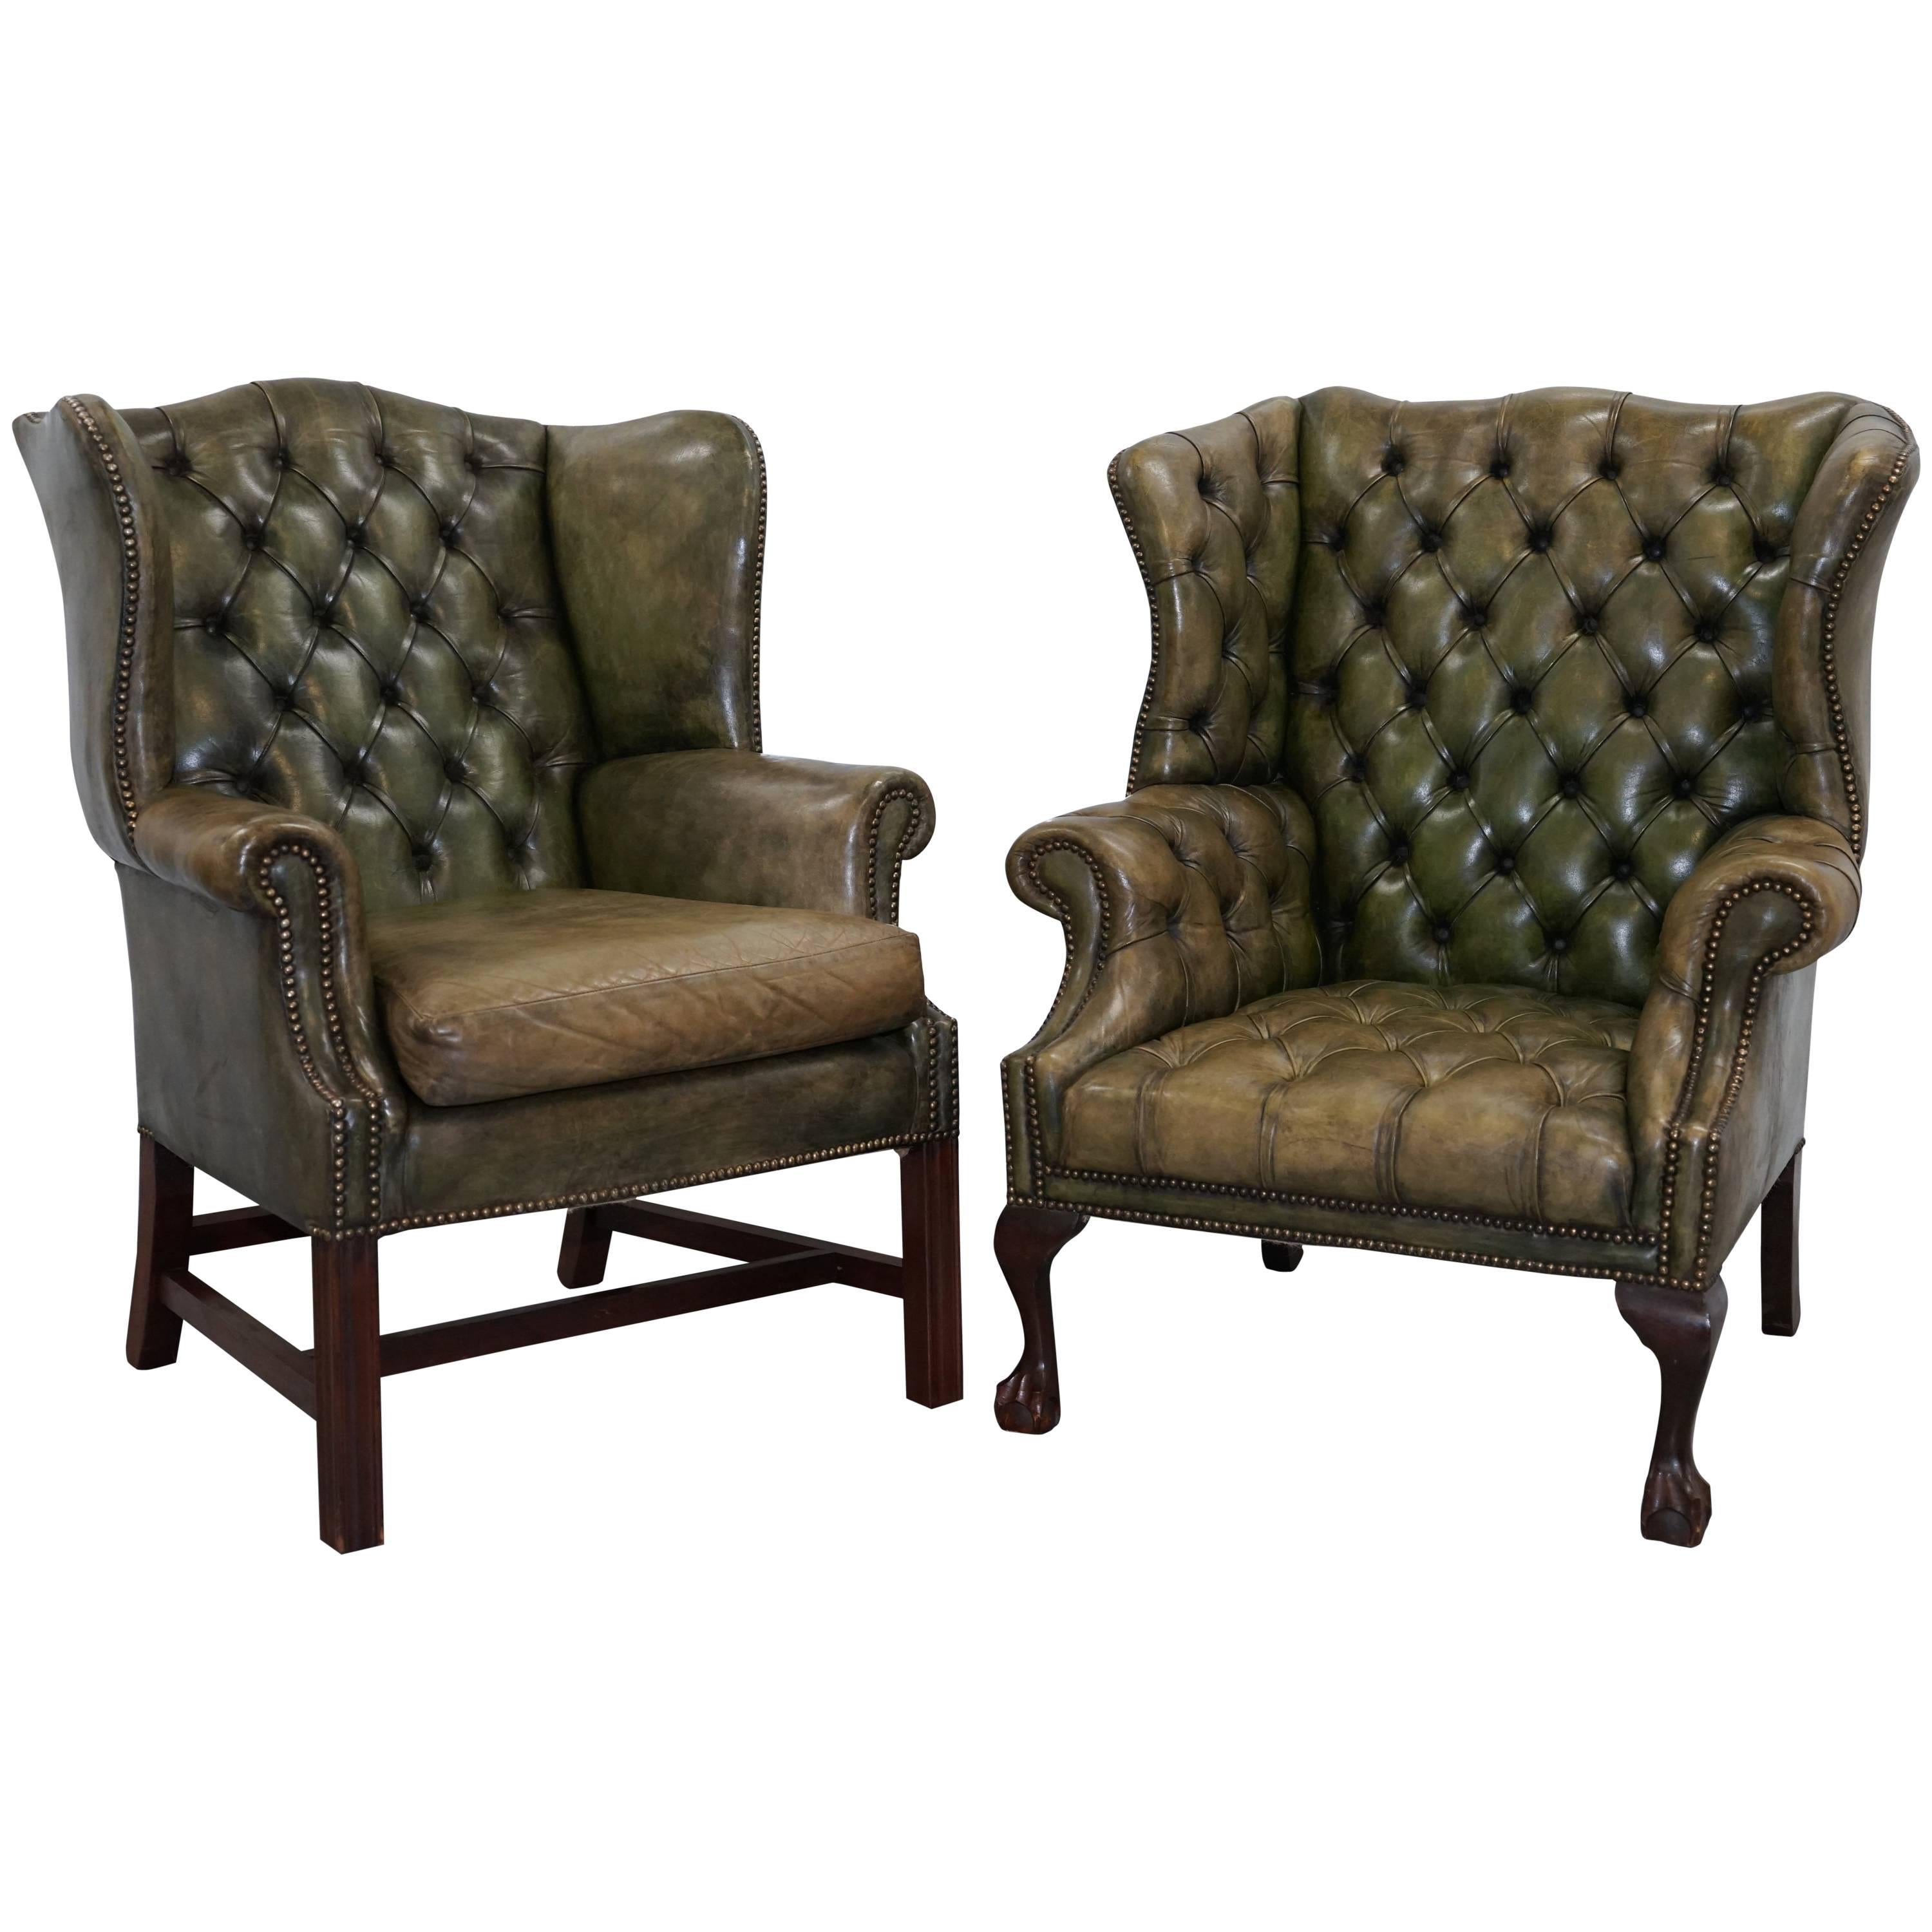 Pair of Original 1960s Chesterfield Hand Dyed Green Leather Wingback Armchairs